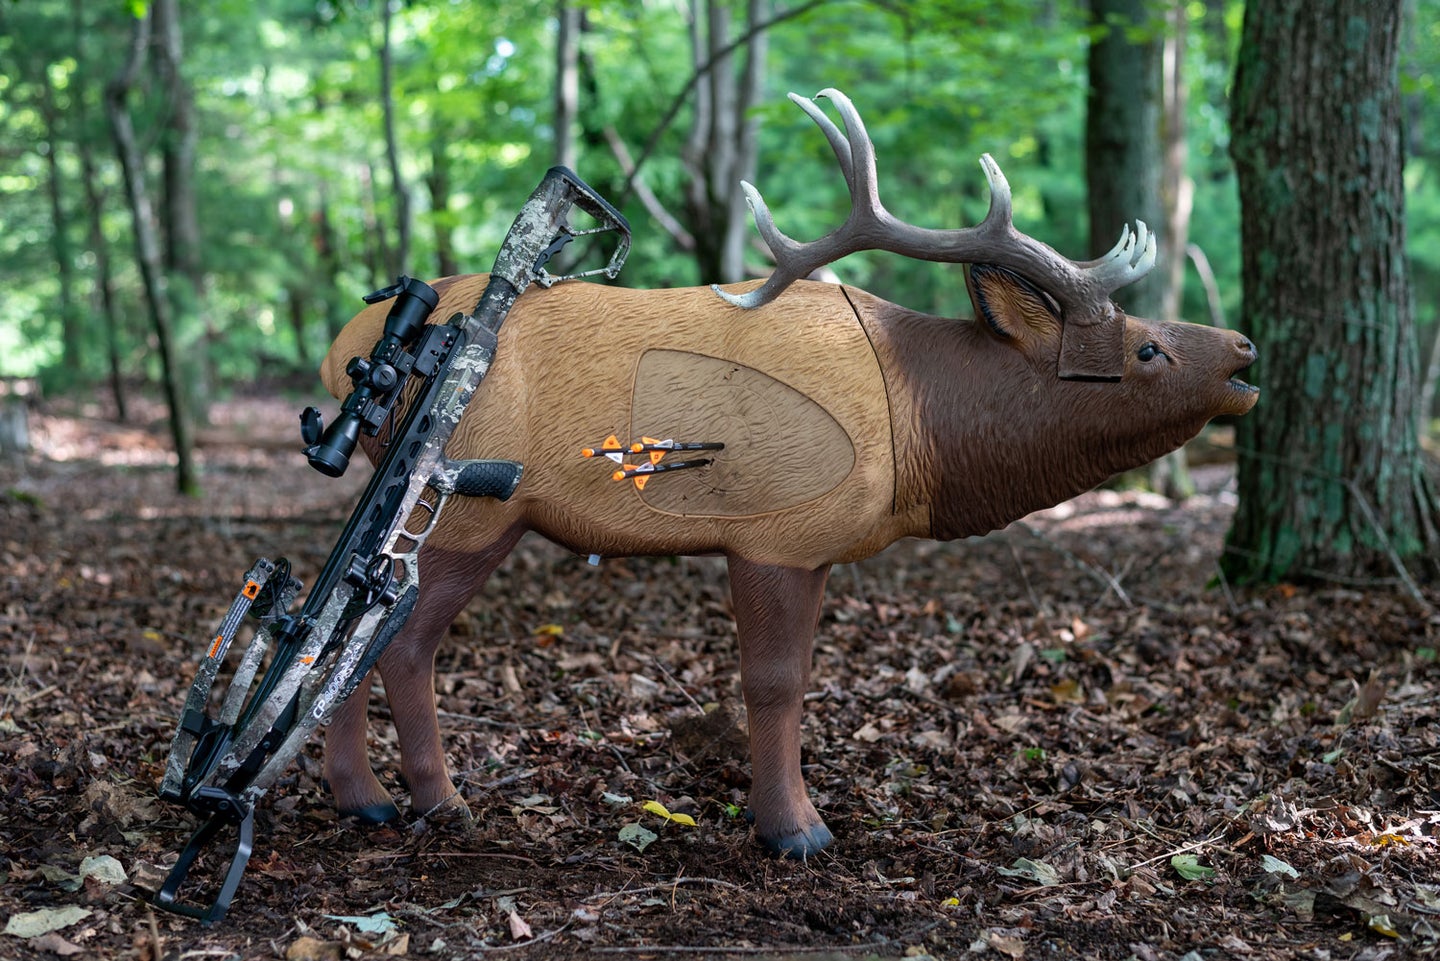 The CenterPoint CP400 crossbow shoots tight groups